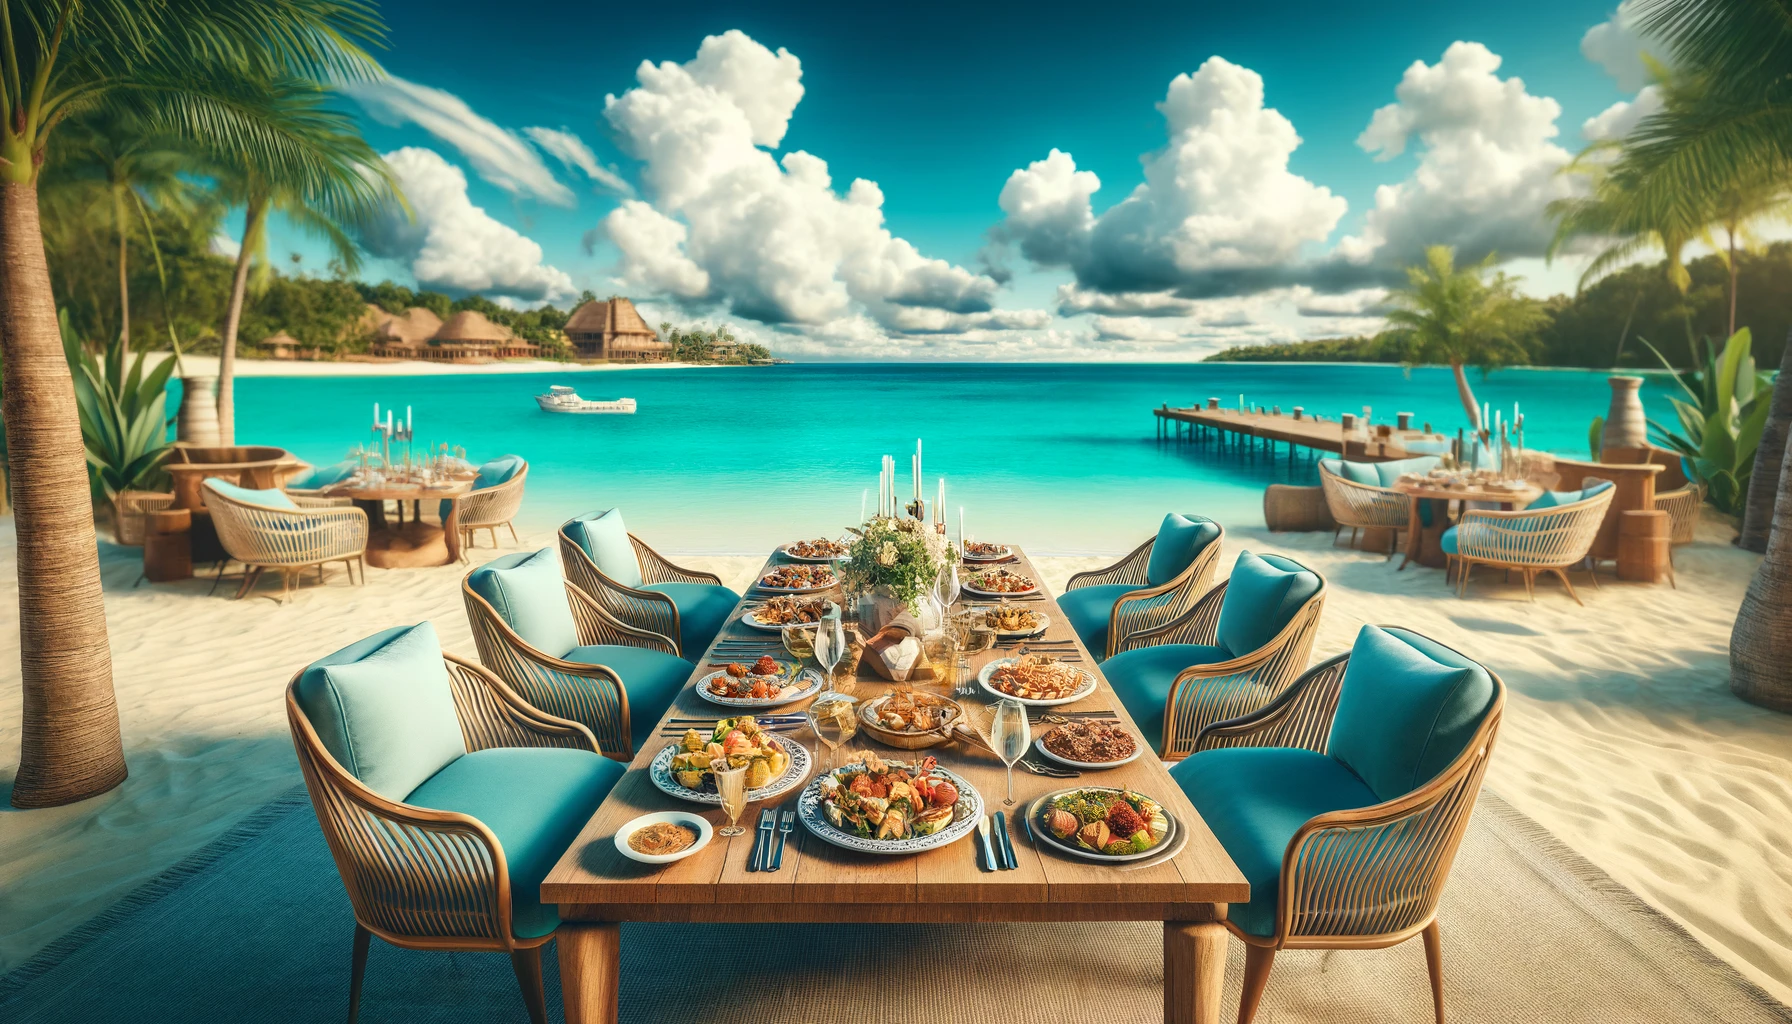 Elegant beachside dining in the Caribbean, featuring a sumptuous feast on a wooden table surrounded by stylish blue chairs, set on white sands against a backdrop of a turquoise lagoon and palm trees, evoking a serene Mexican coastal vibe